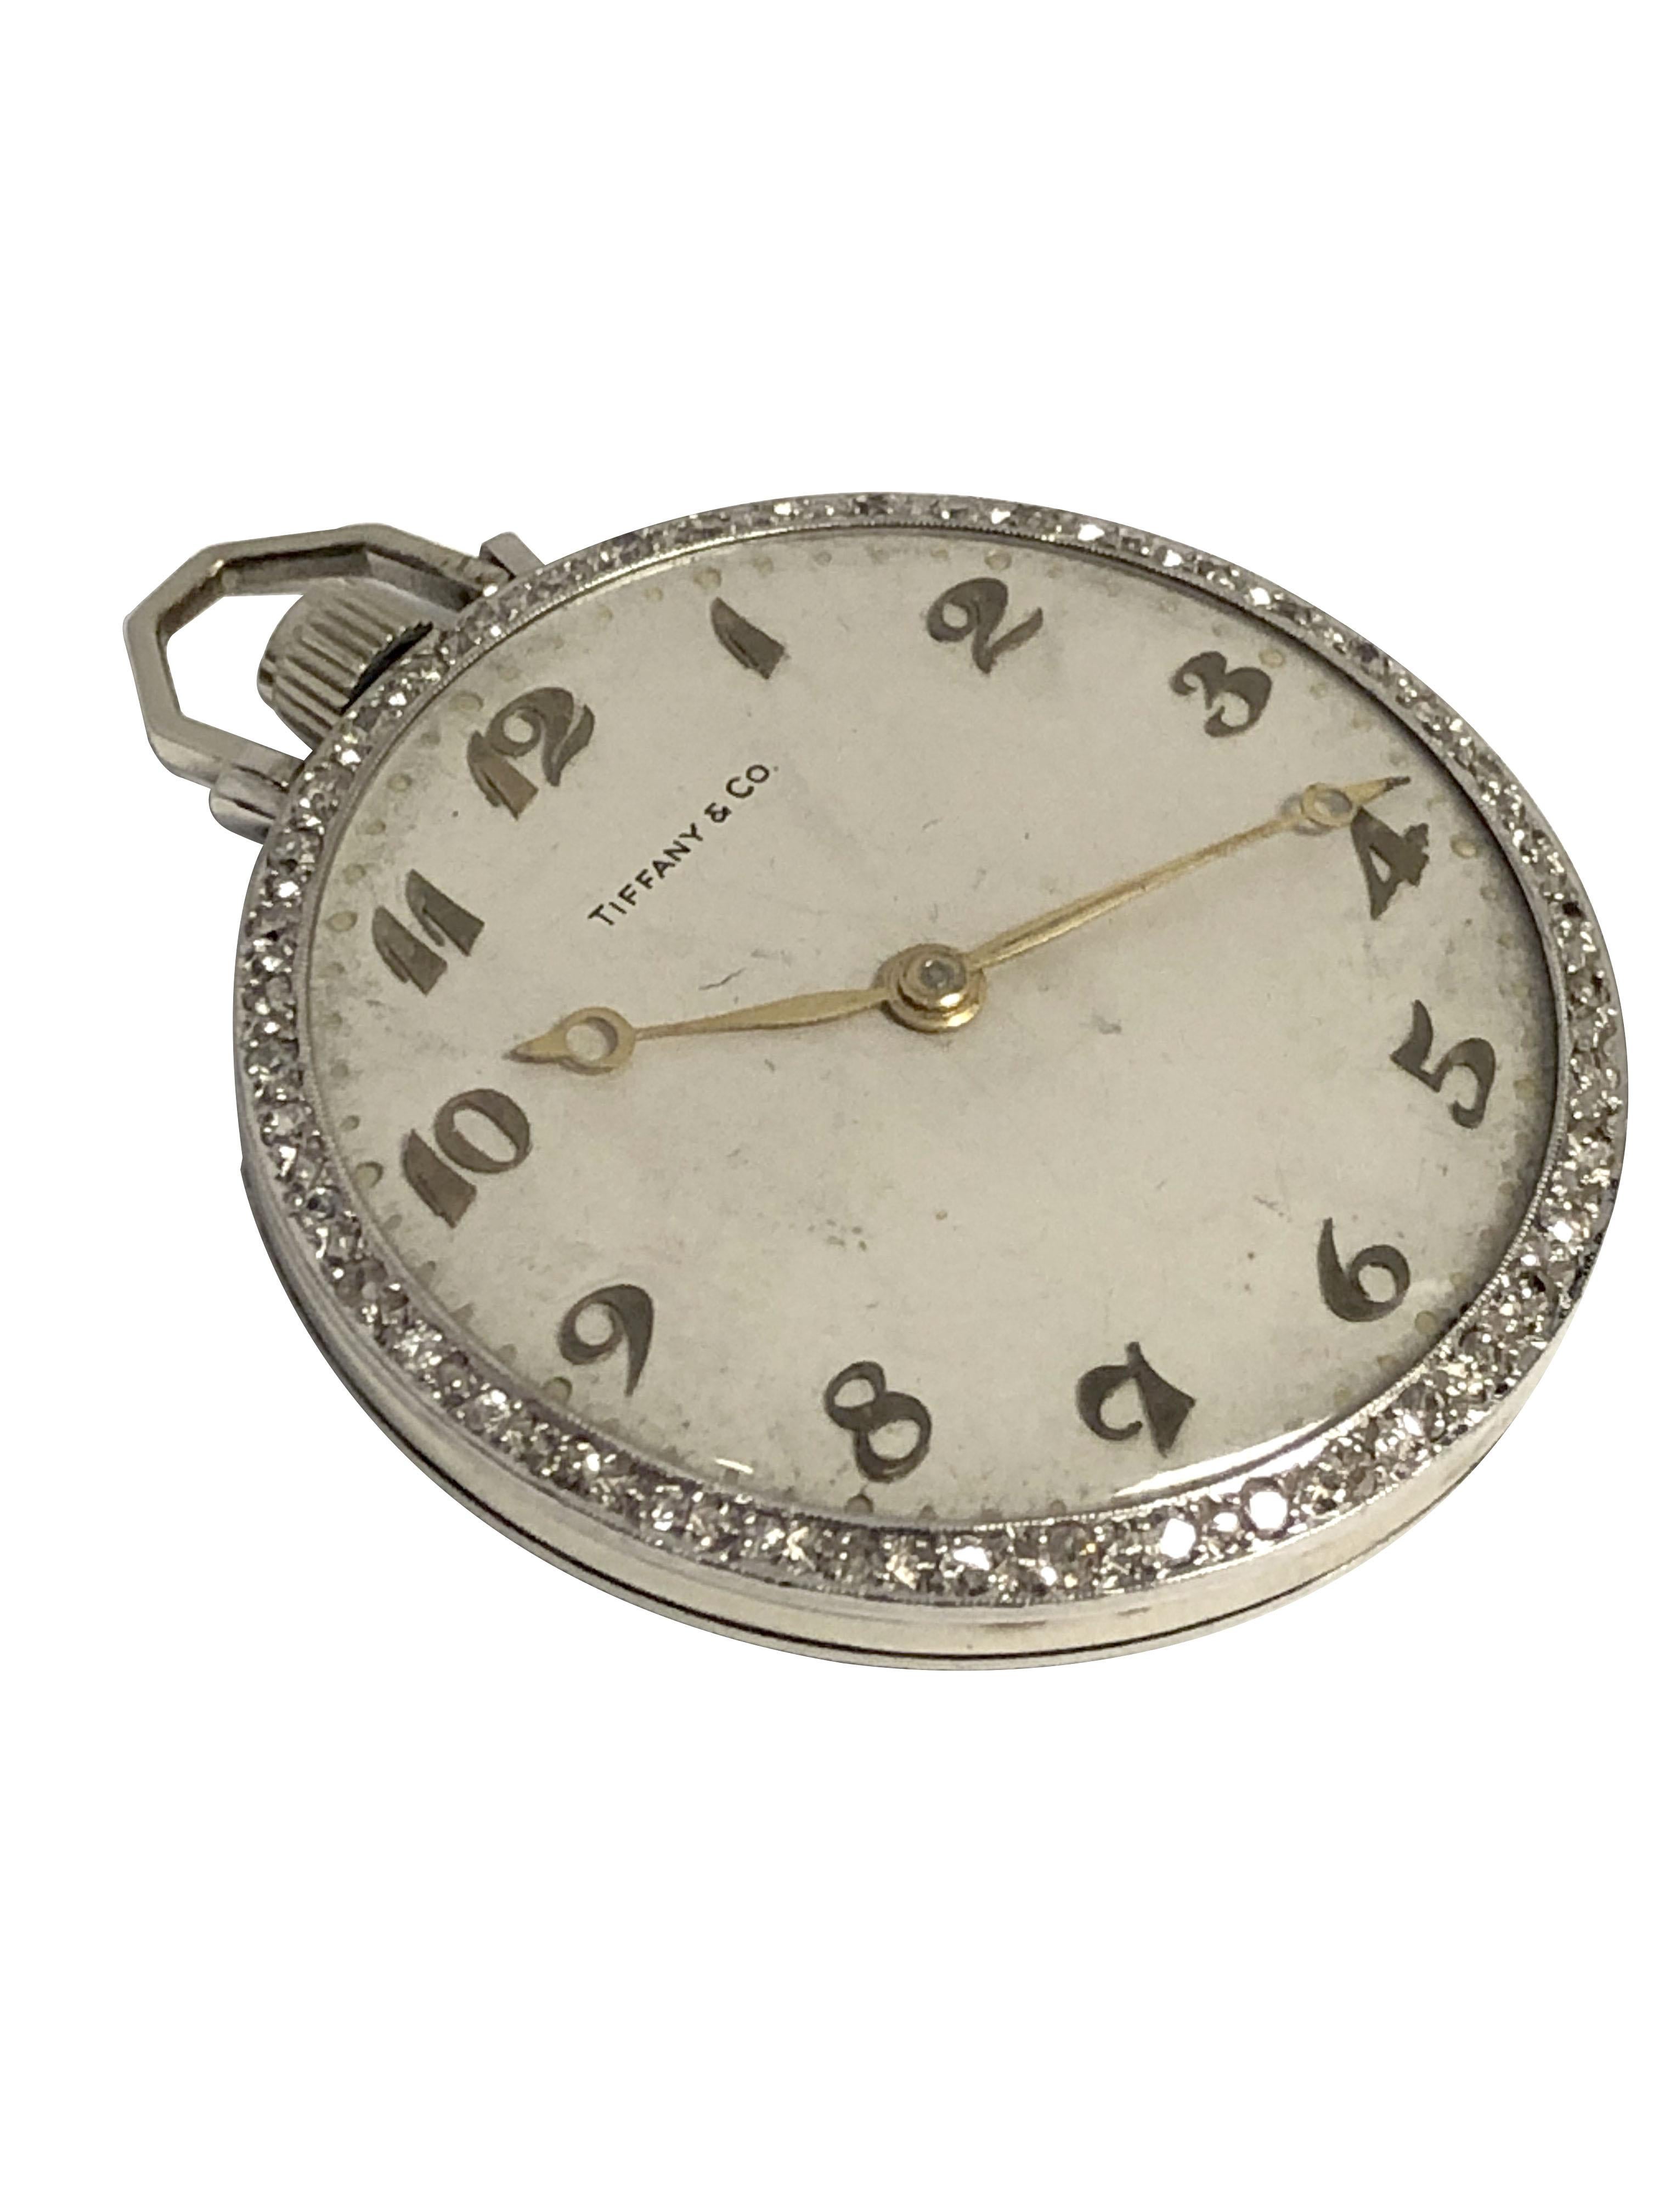 Circa 1930s Tiffany & Company Gents Pocket Watch, 41 M.M. 2 piece Platinum case with Diamond set bezel totaling approximately 1 Carat.  Sandoz Watch Co. of Switzerland 17 Jewel Mechanical, Manual wind movement. Original Silver Satin Dial with Raised